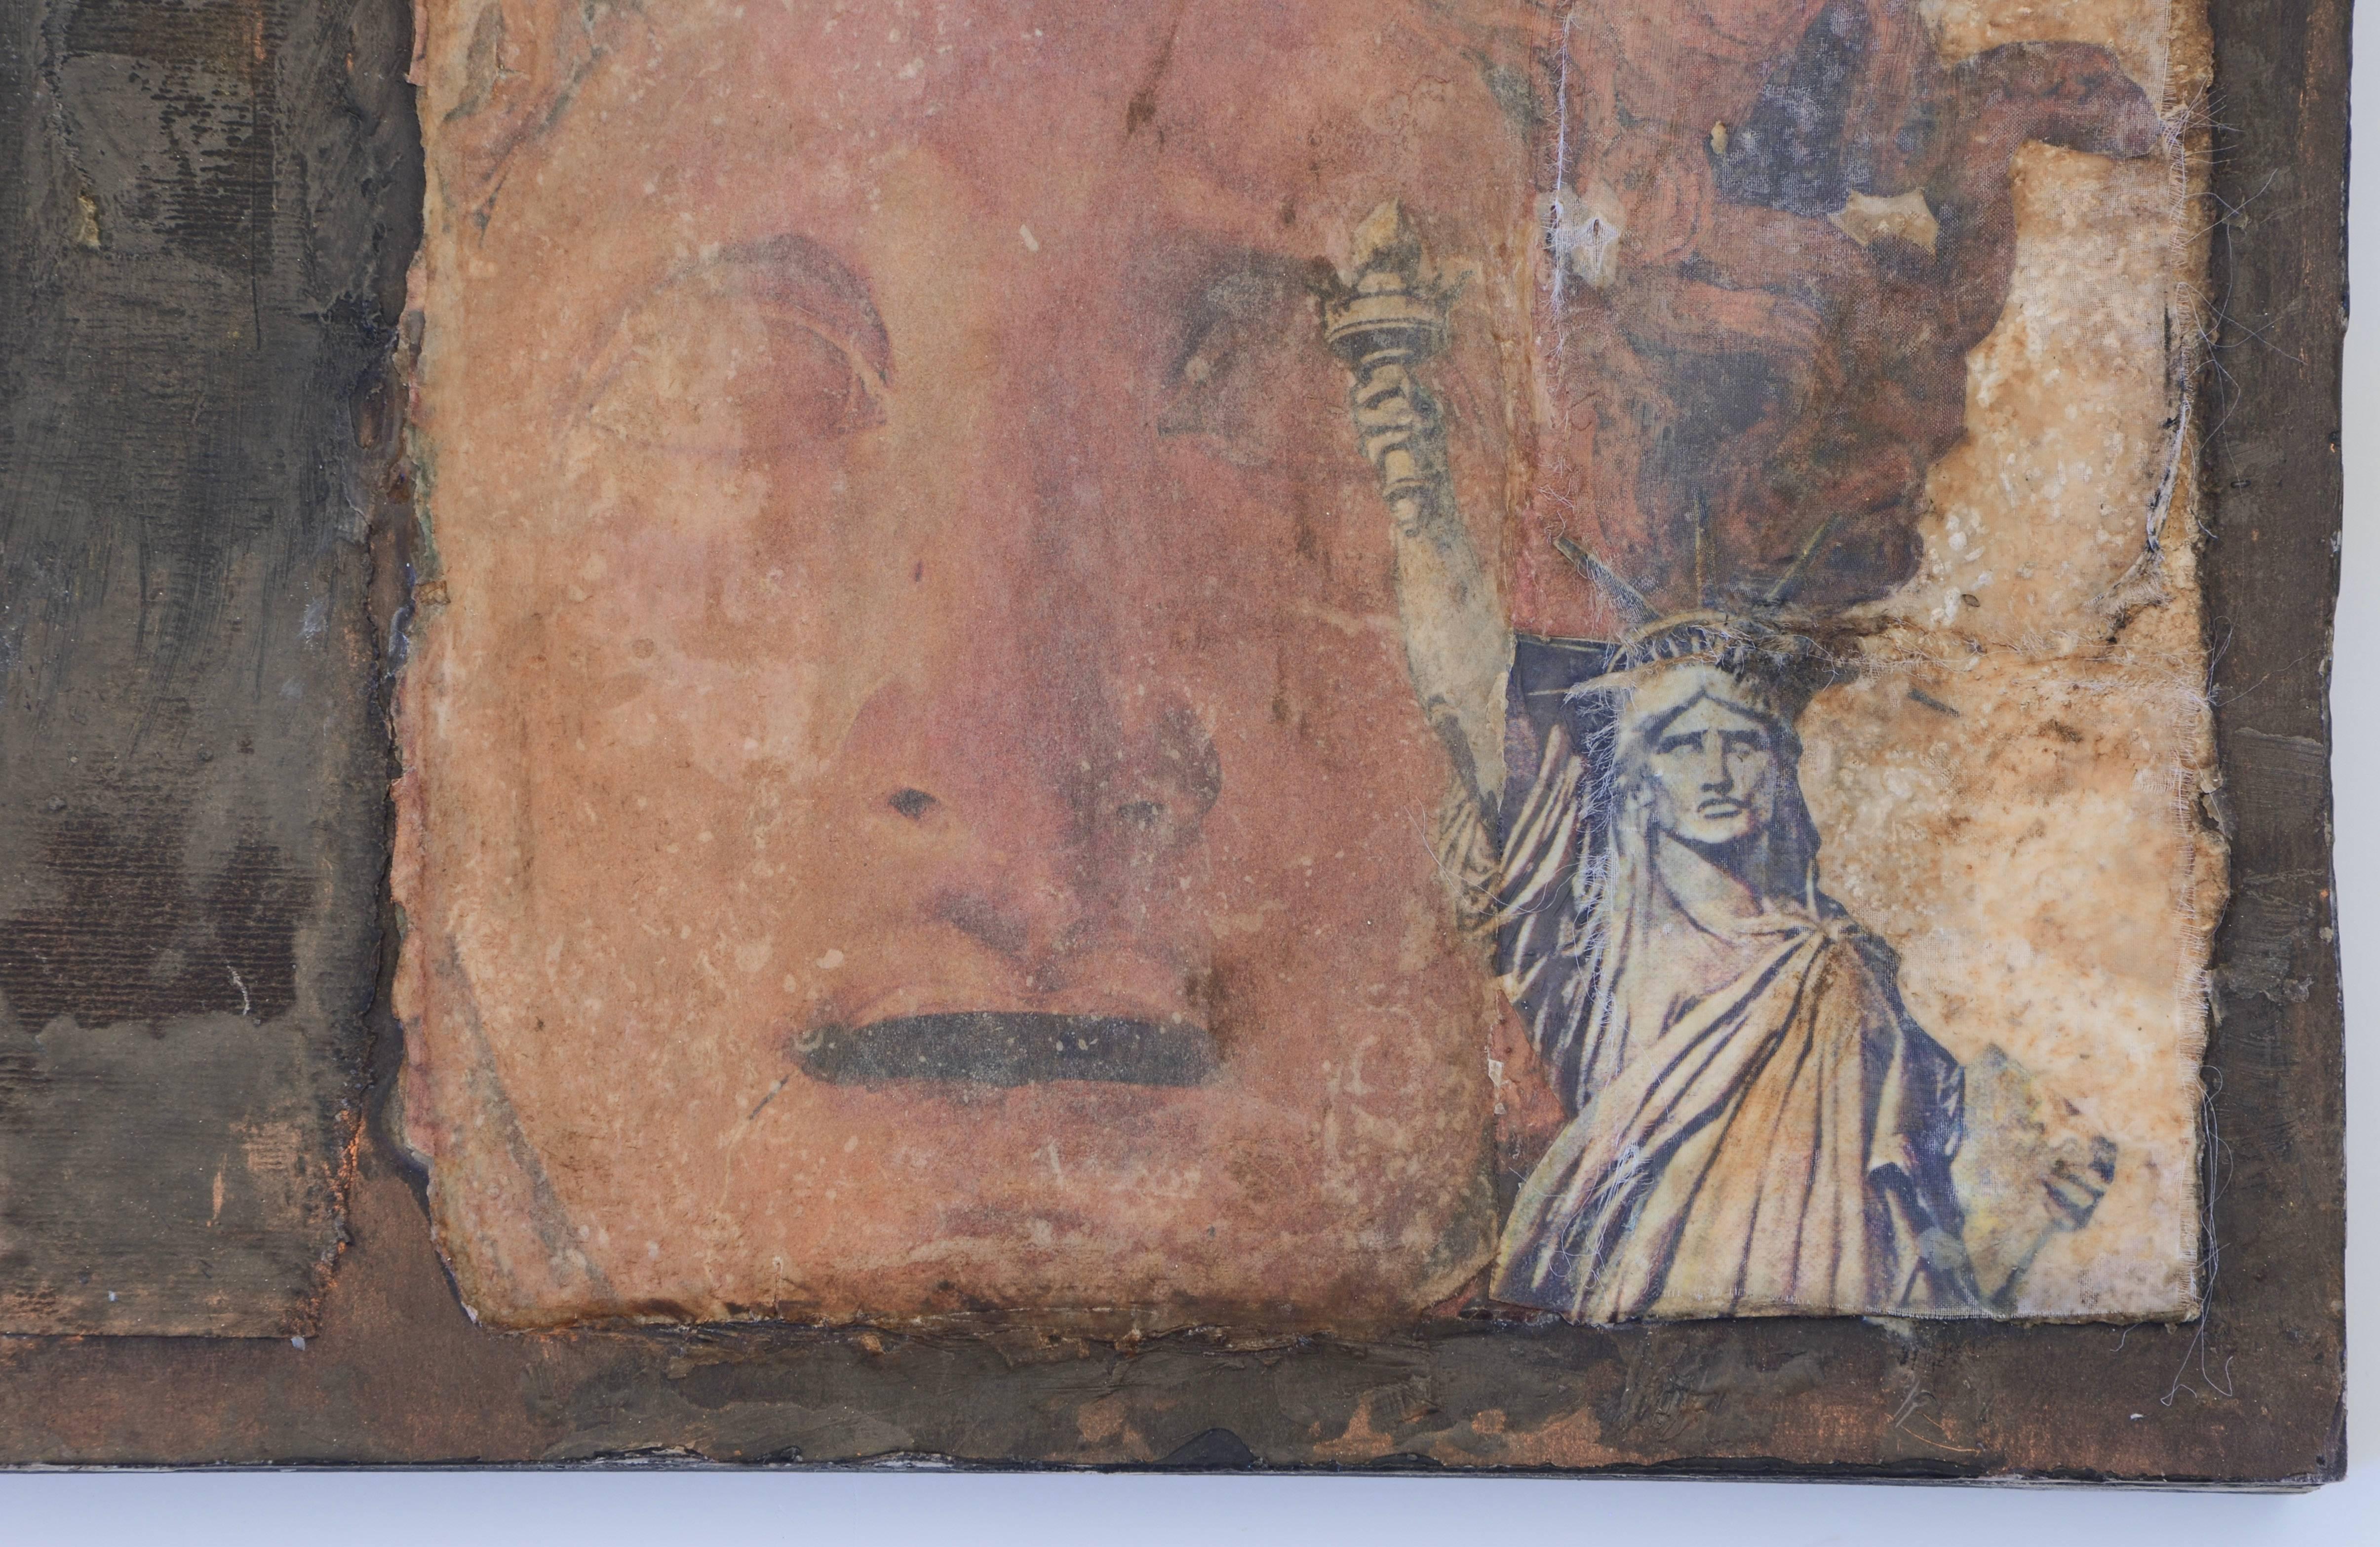 Dorothy Simpson Krause’ “Liberty” is a 12 x 12 inch mixed media collage with encaustic on textured panel.  An image of an ancient Greek bust in warm terra cotta tones creates a background for the smaller, unmistakable verdigris image of the Statue